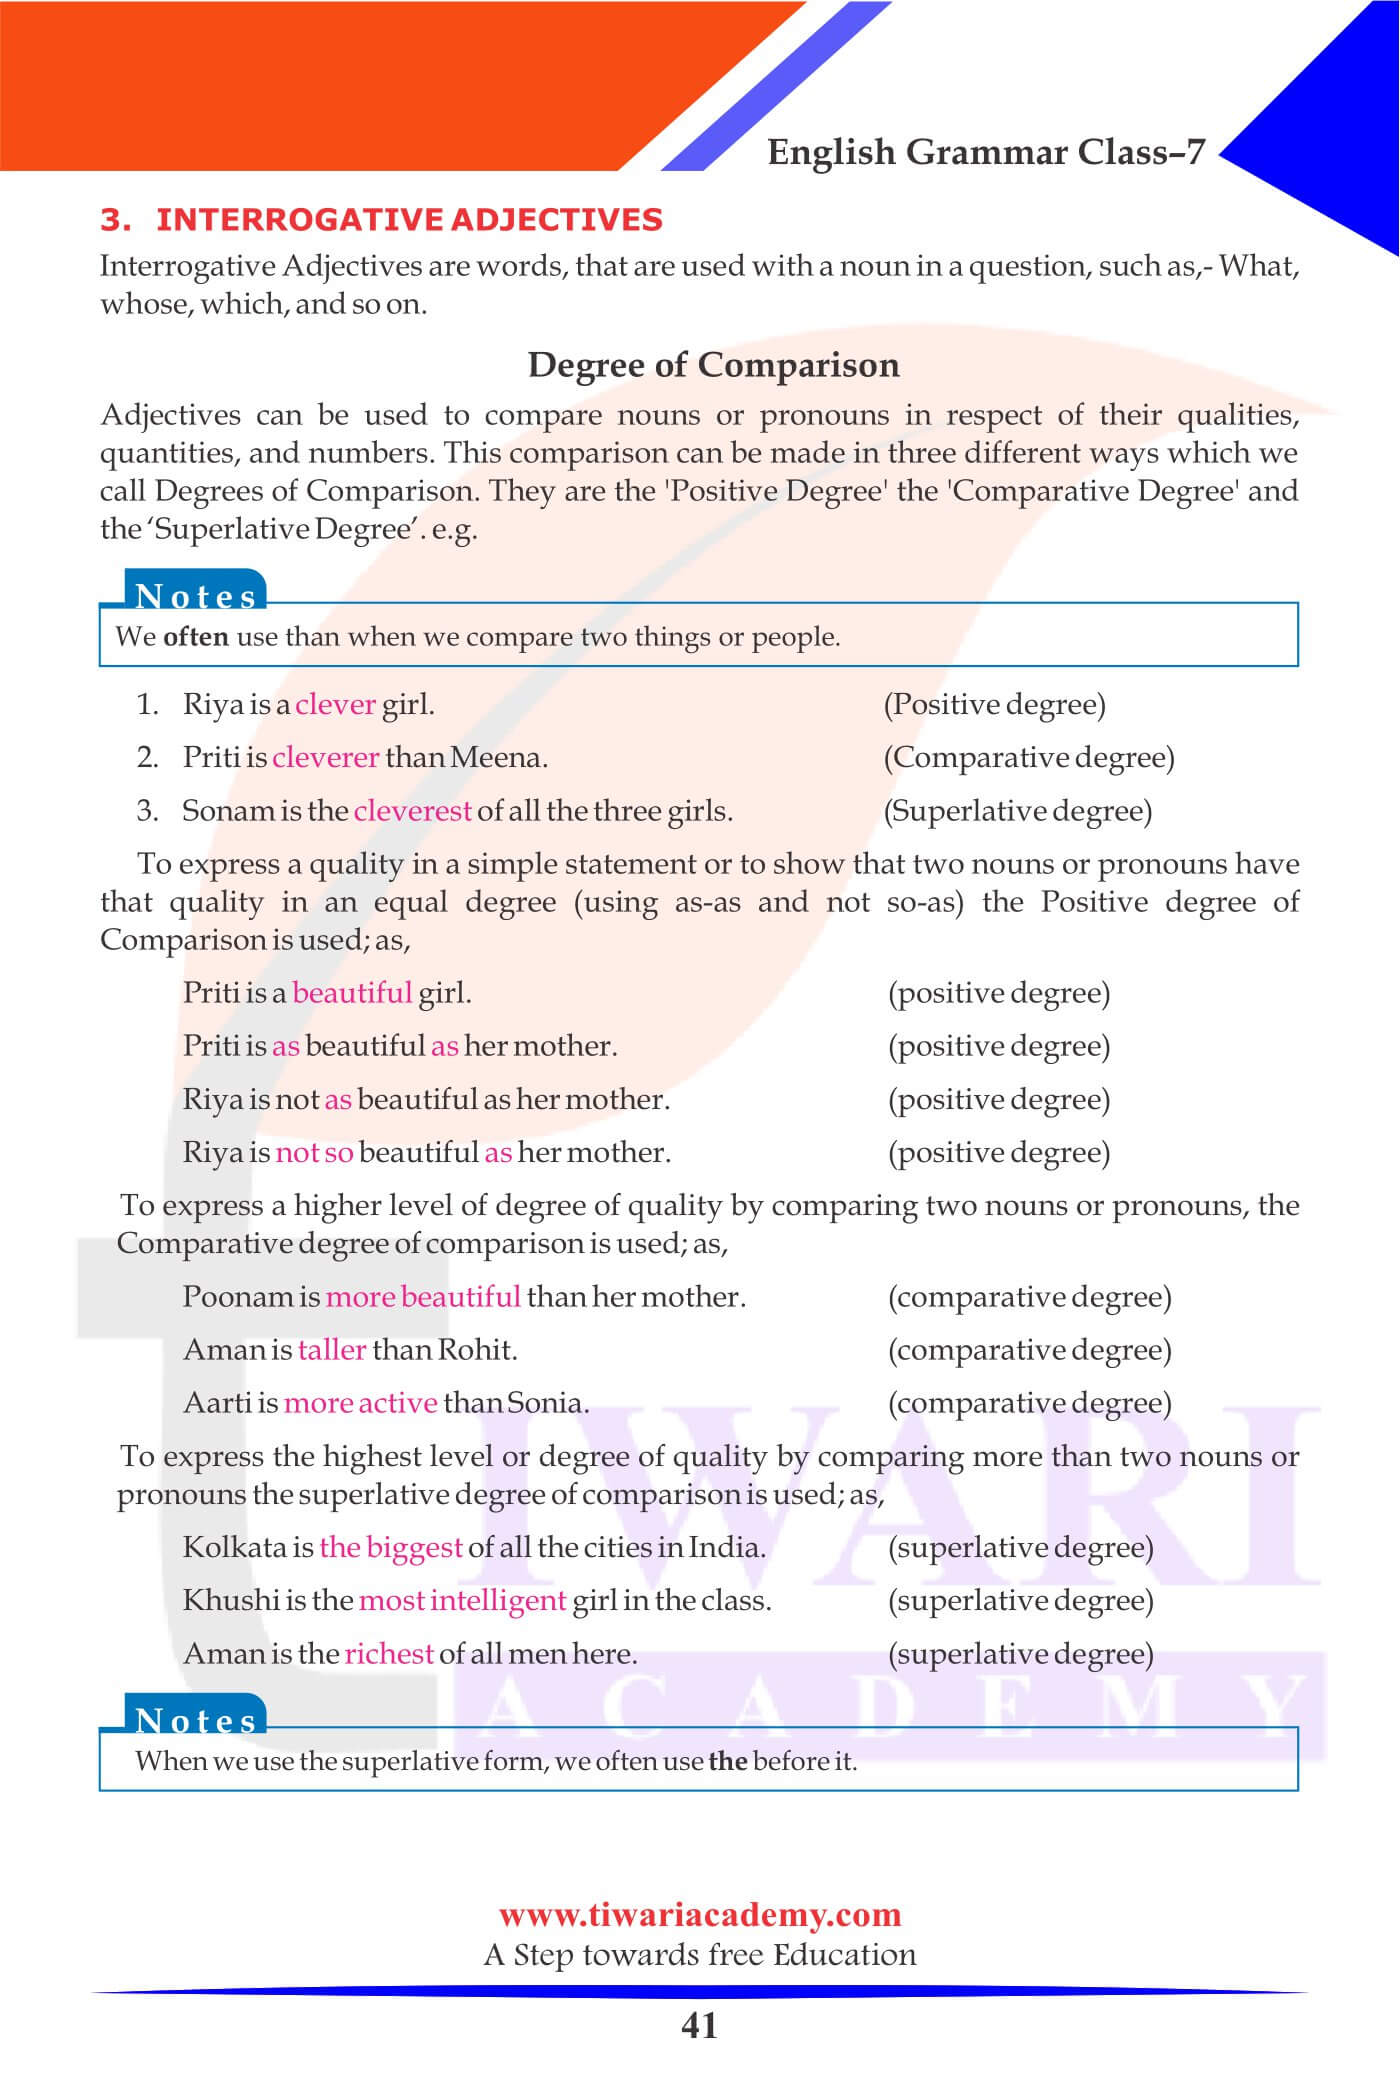 Class 7th English Grammar Chapter 7 The Adjective